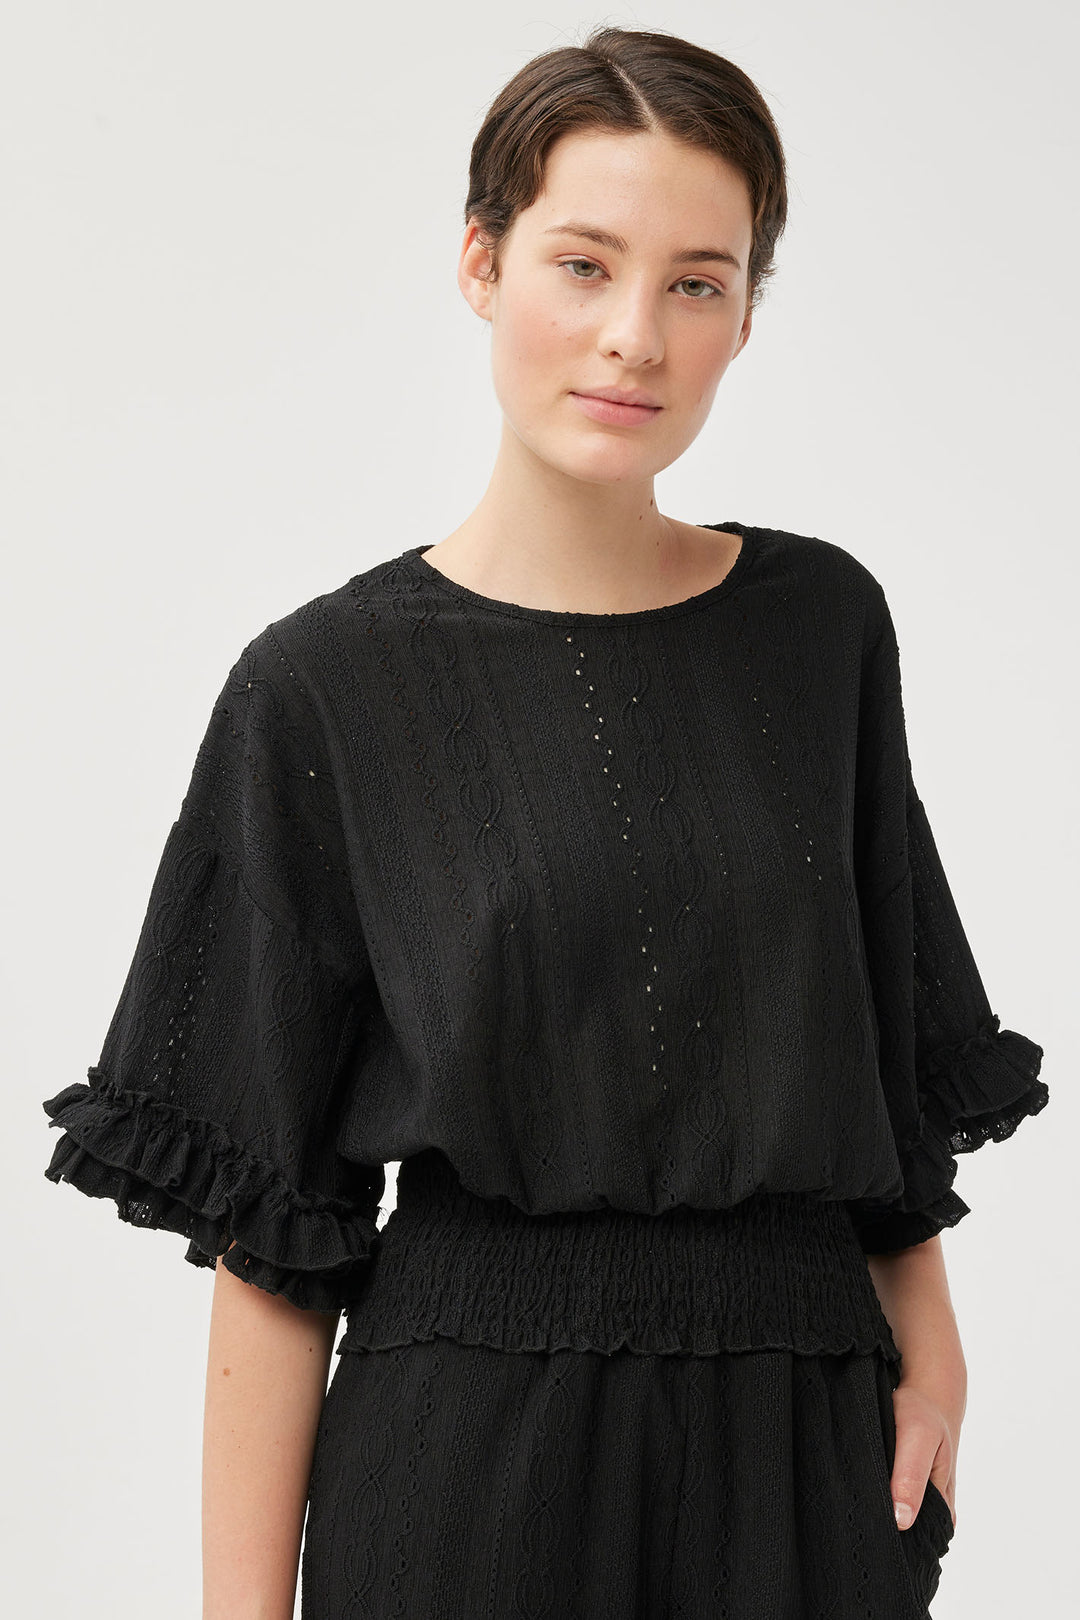 Leo & Ugo TEV446 Black Embroidered Ruffle Sleeve Top - Experience Boutique